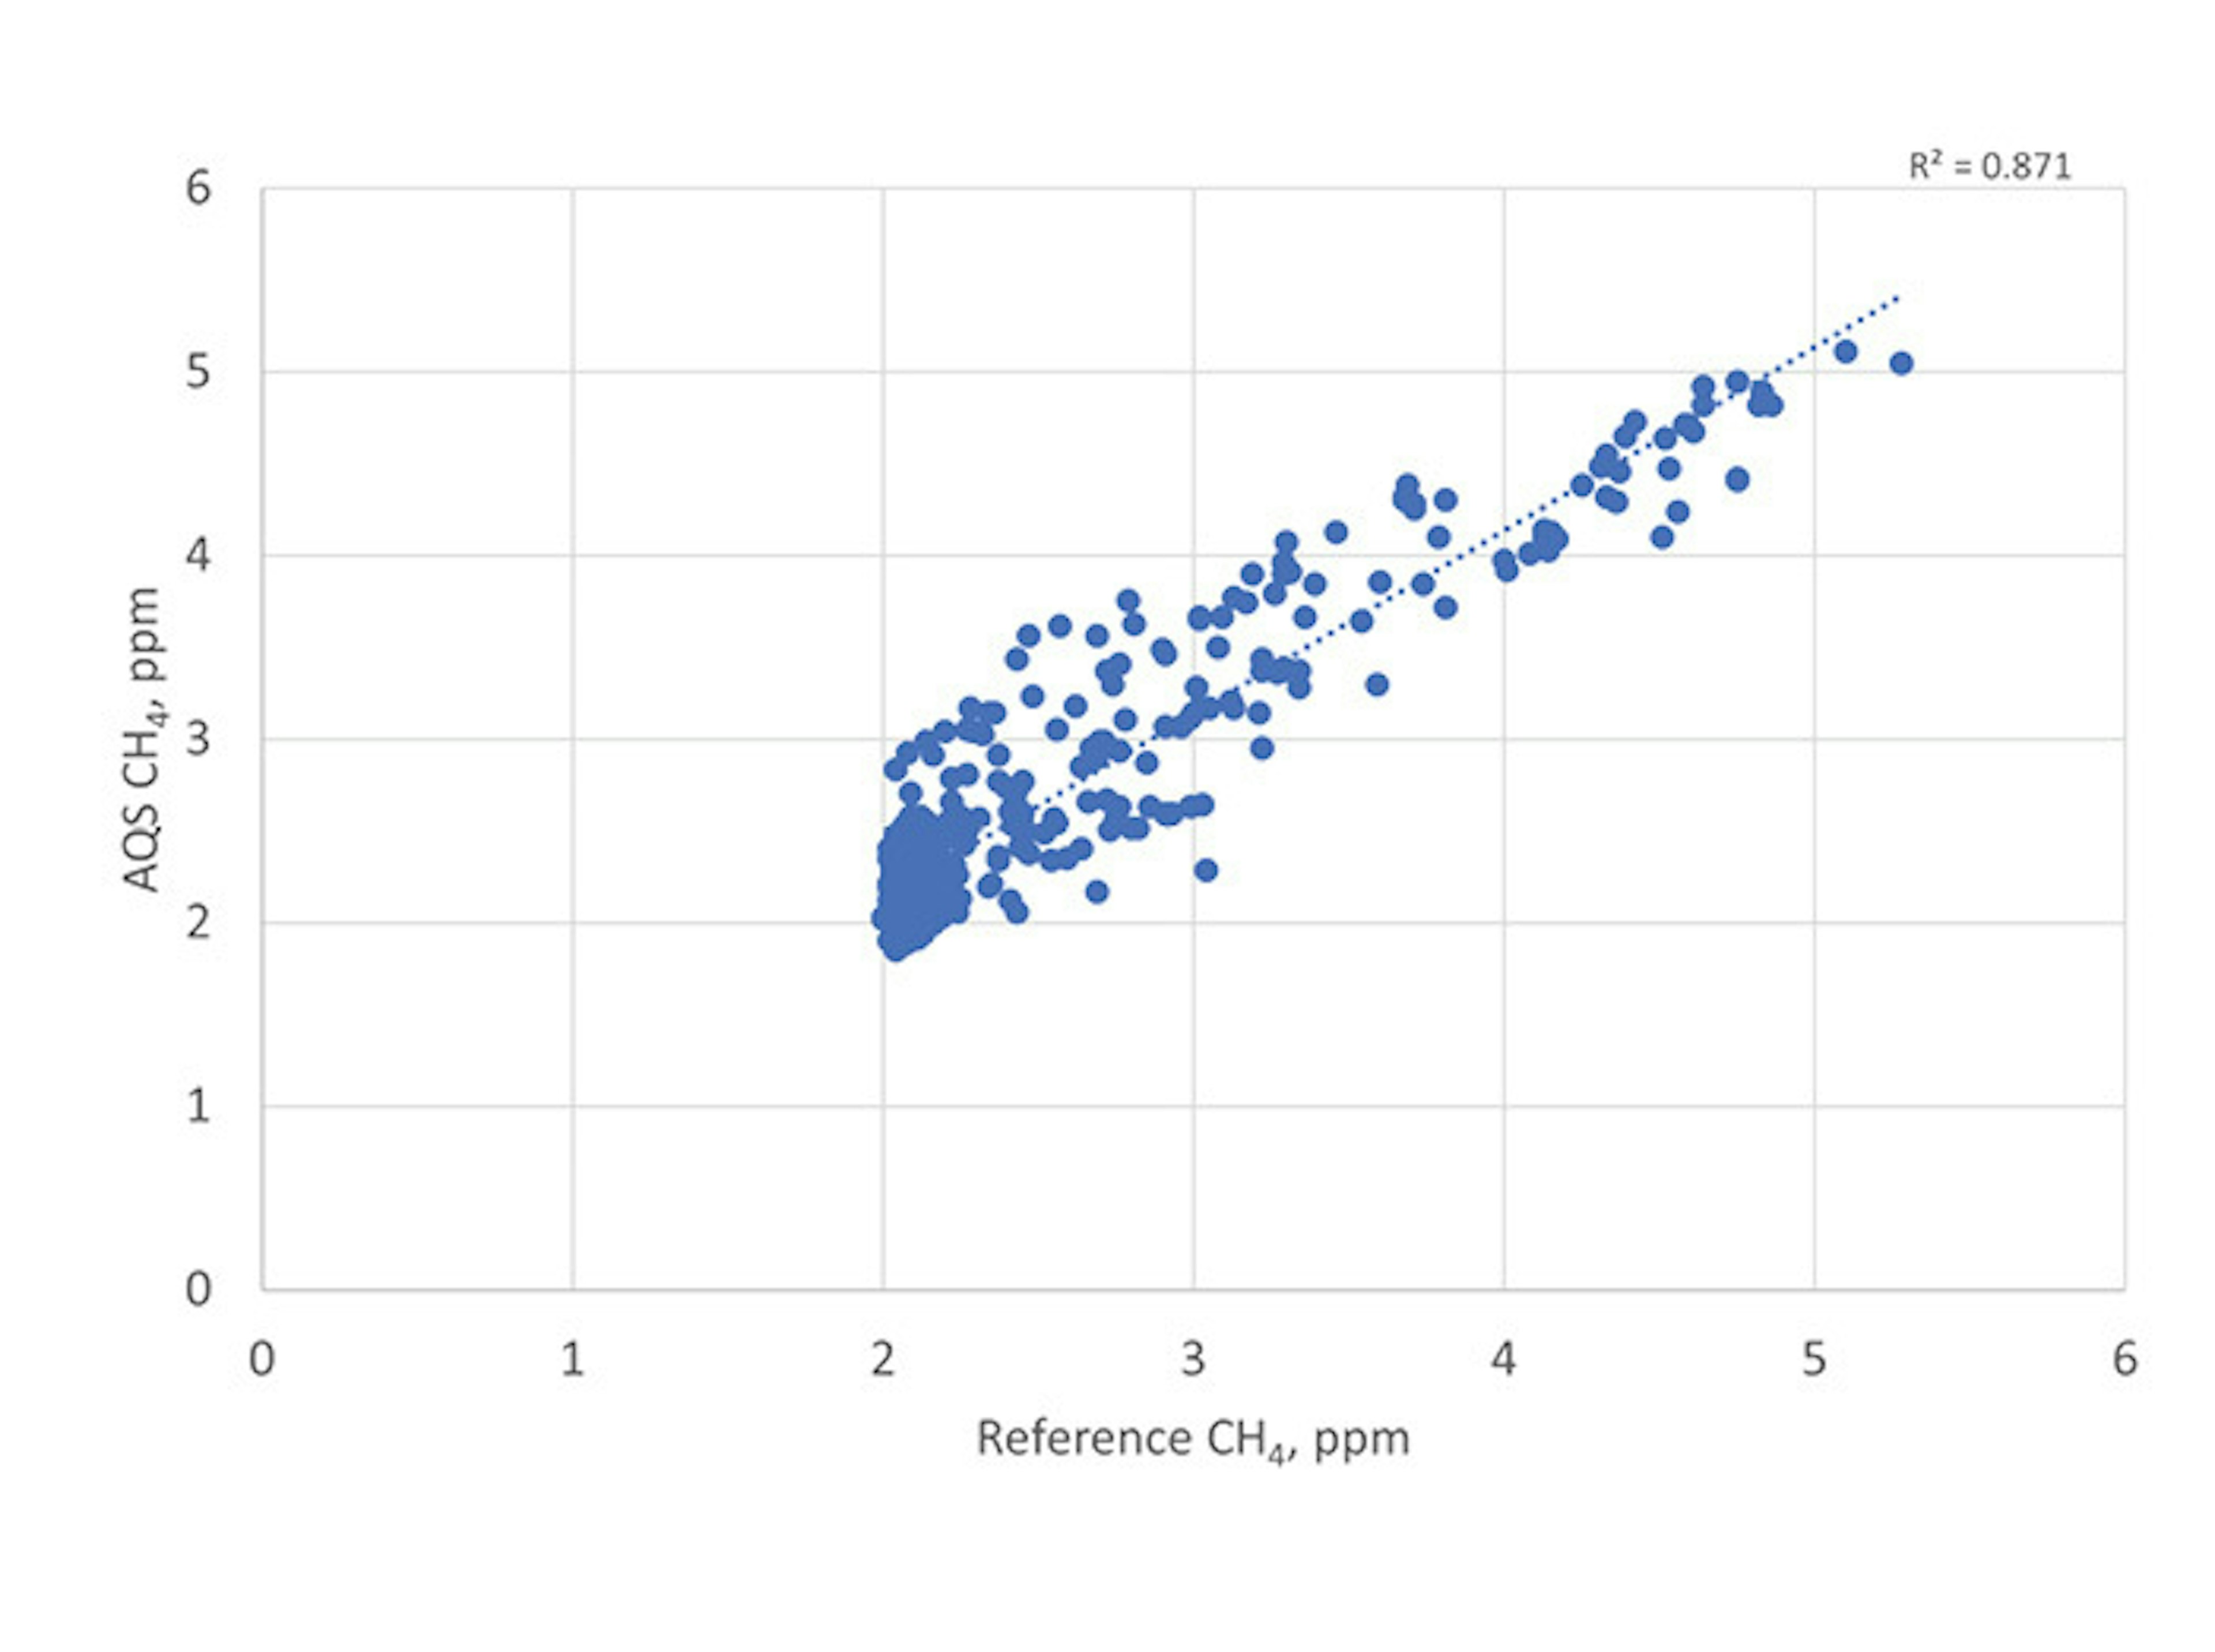 Methane module scatter plot of data with linear regression and coefficient of determination